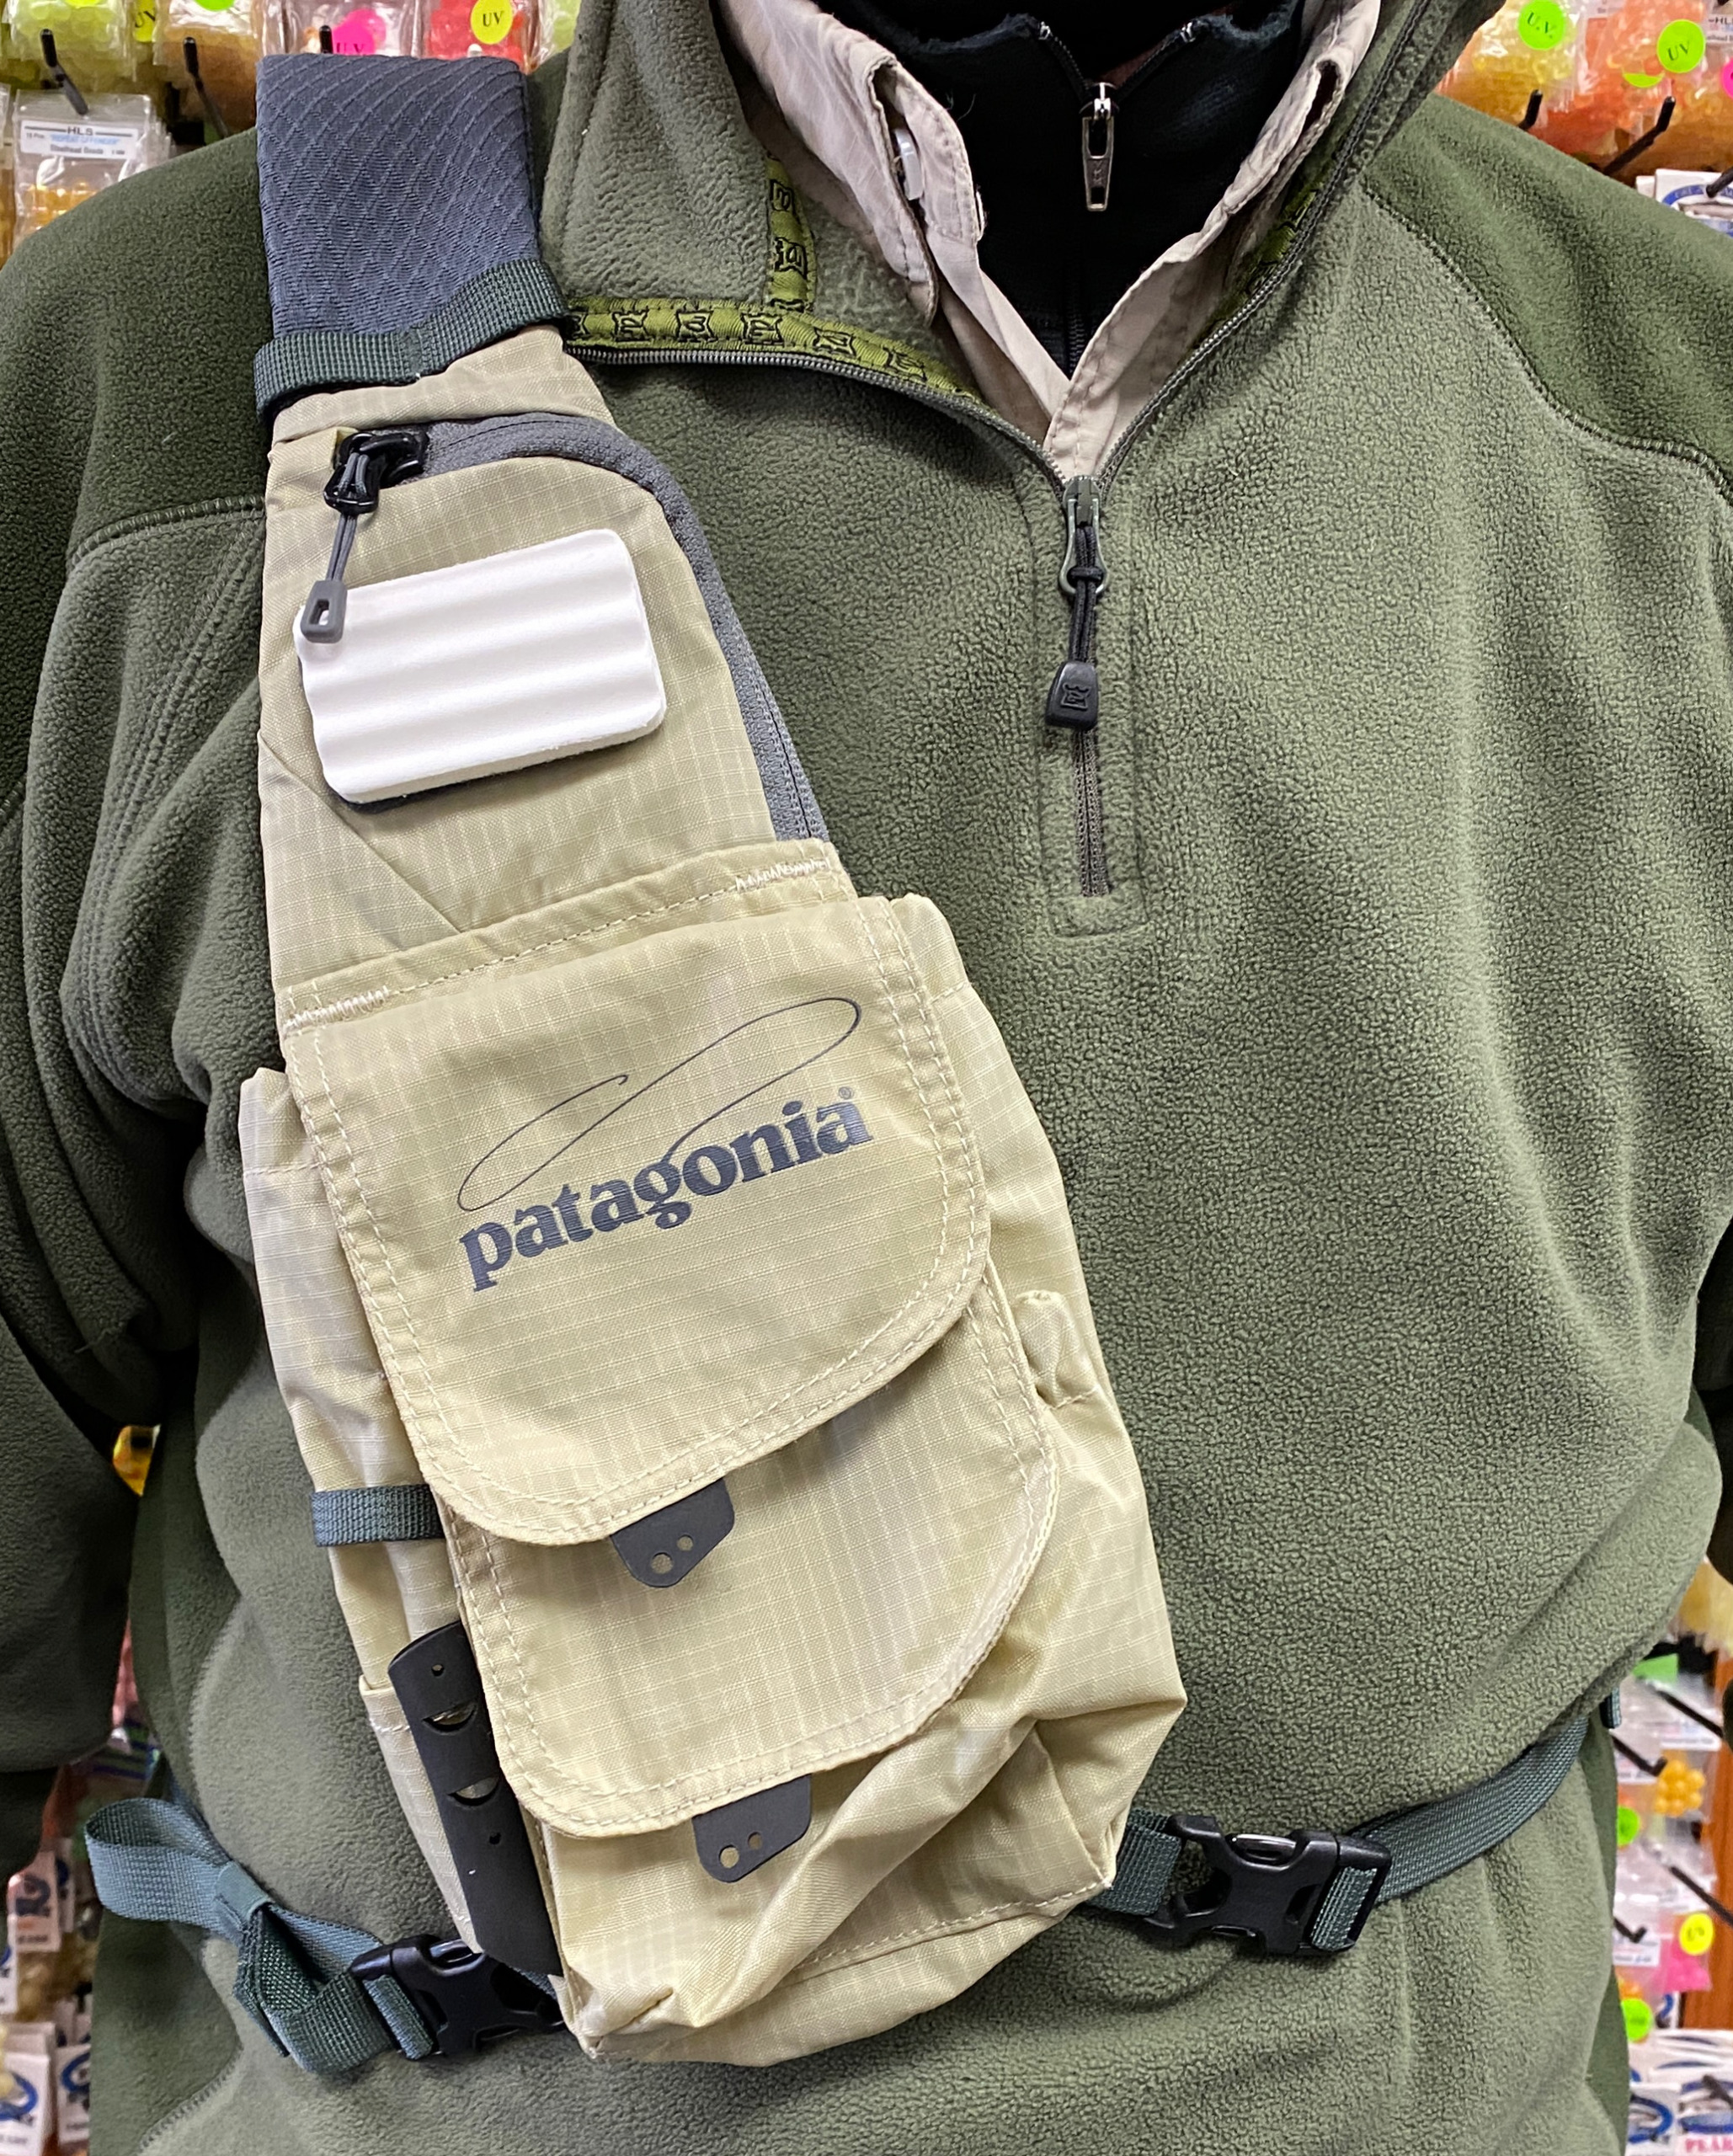 Patagonia Vest Front Sling Pack - NEVER USED! - $95